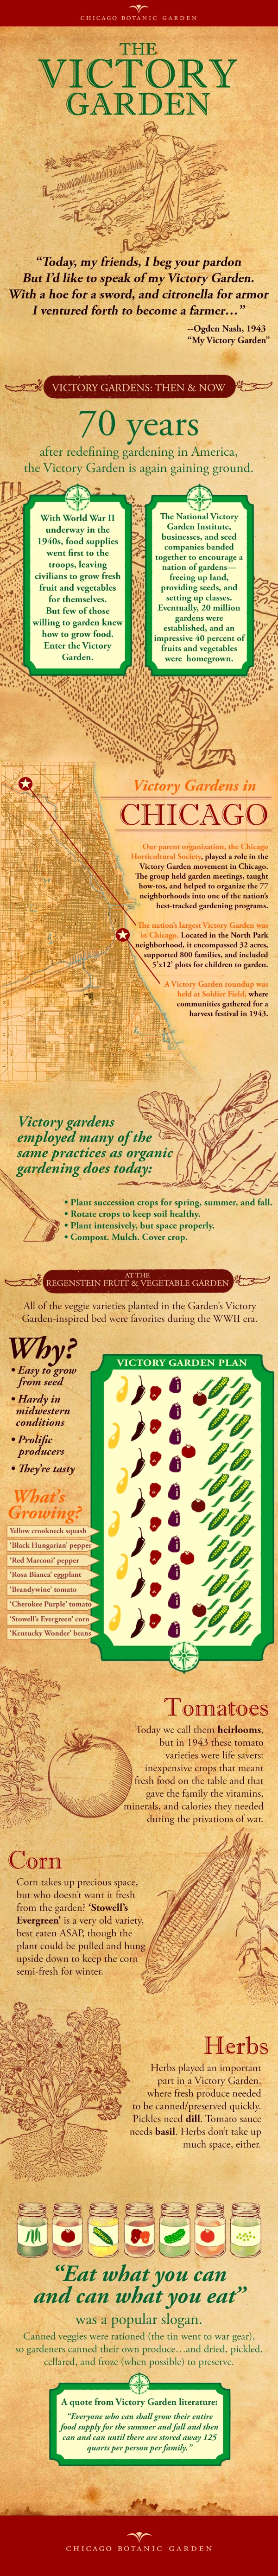 An Infographic on Victory Gardens